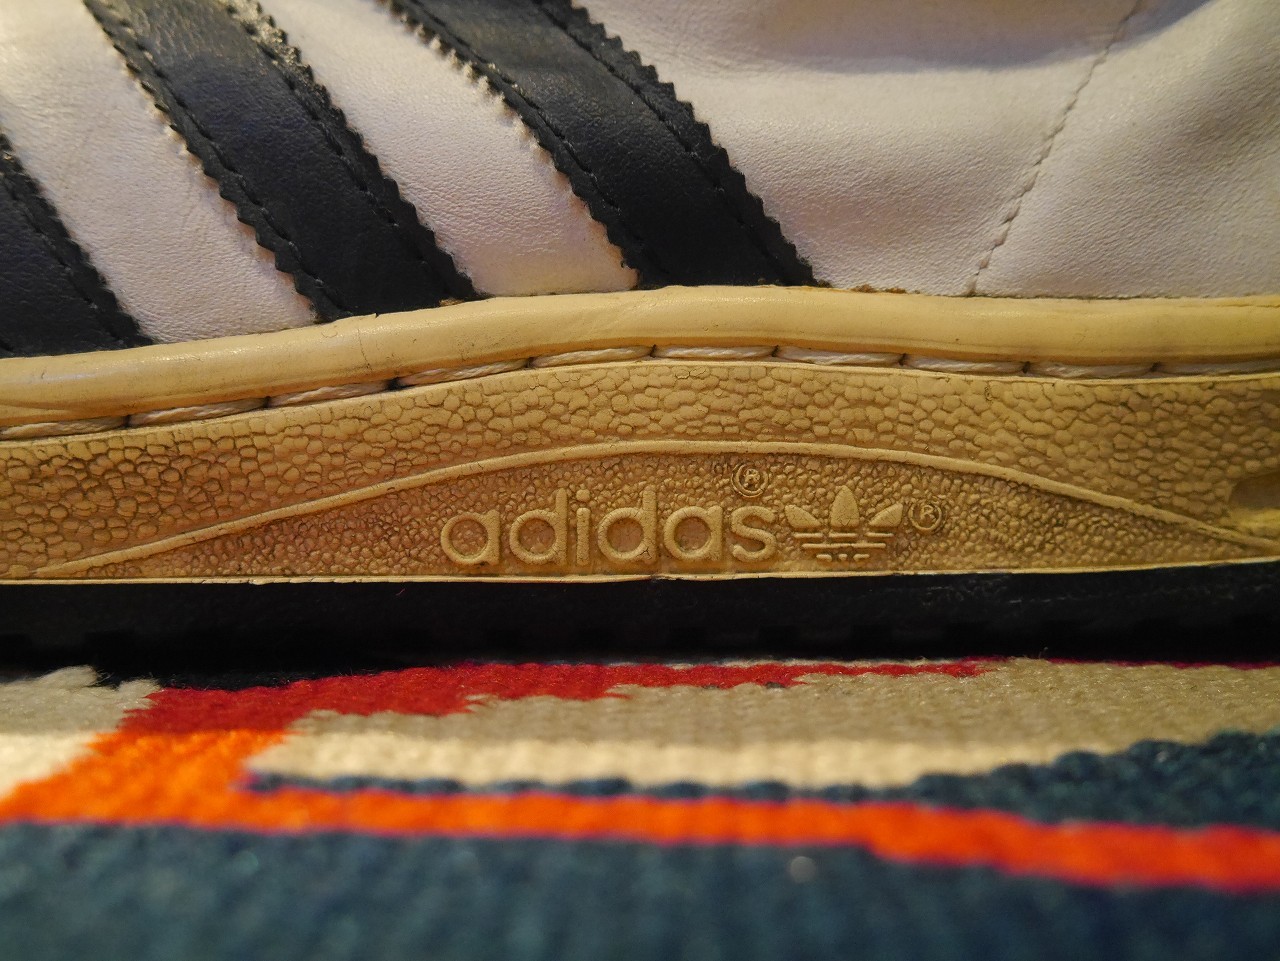 1980's " adidas " UNKNOWN BASKETBALL SHOES!! : BAYSON BLOG